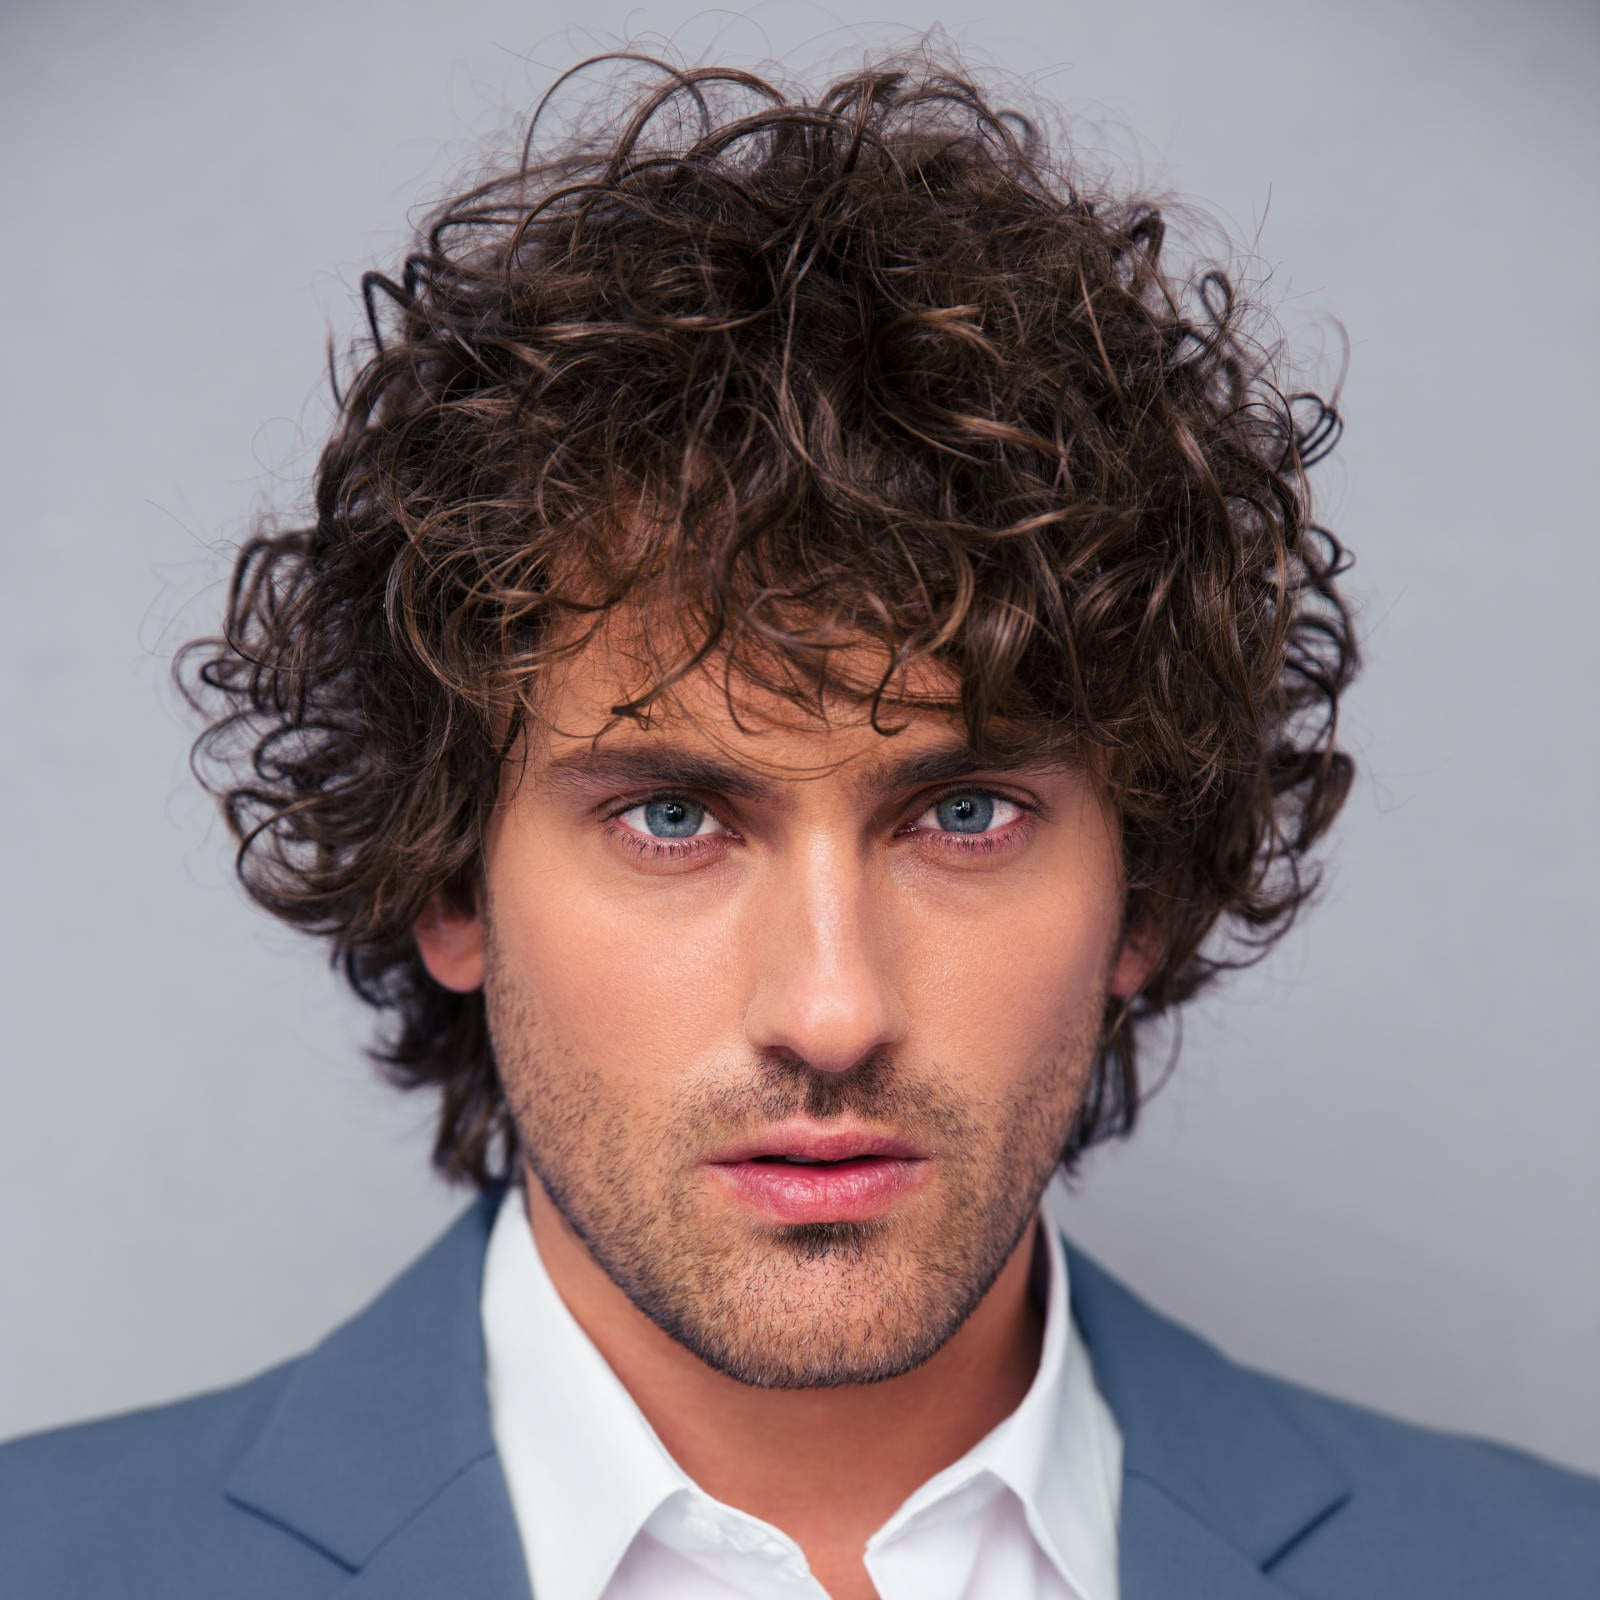 Hairstyles For Curly Haired Man
 40 Modern Men s Hairstyles for Curly Hair That Will